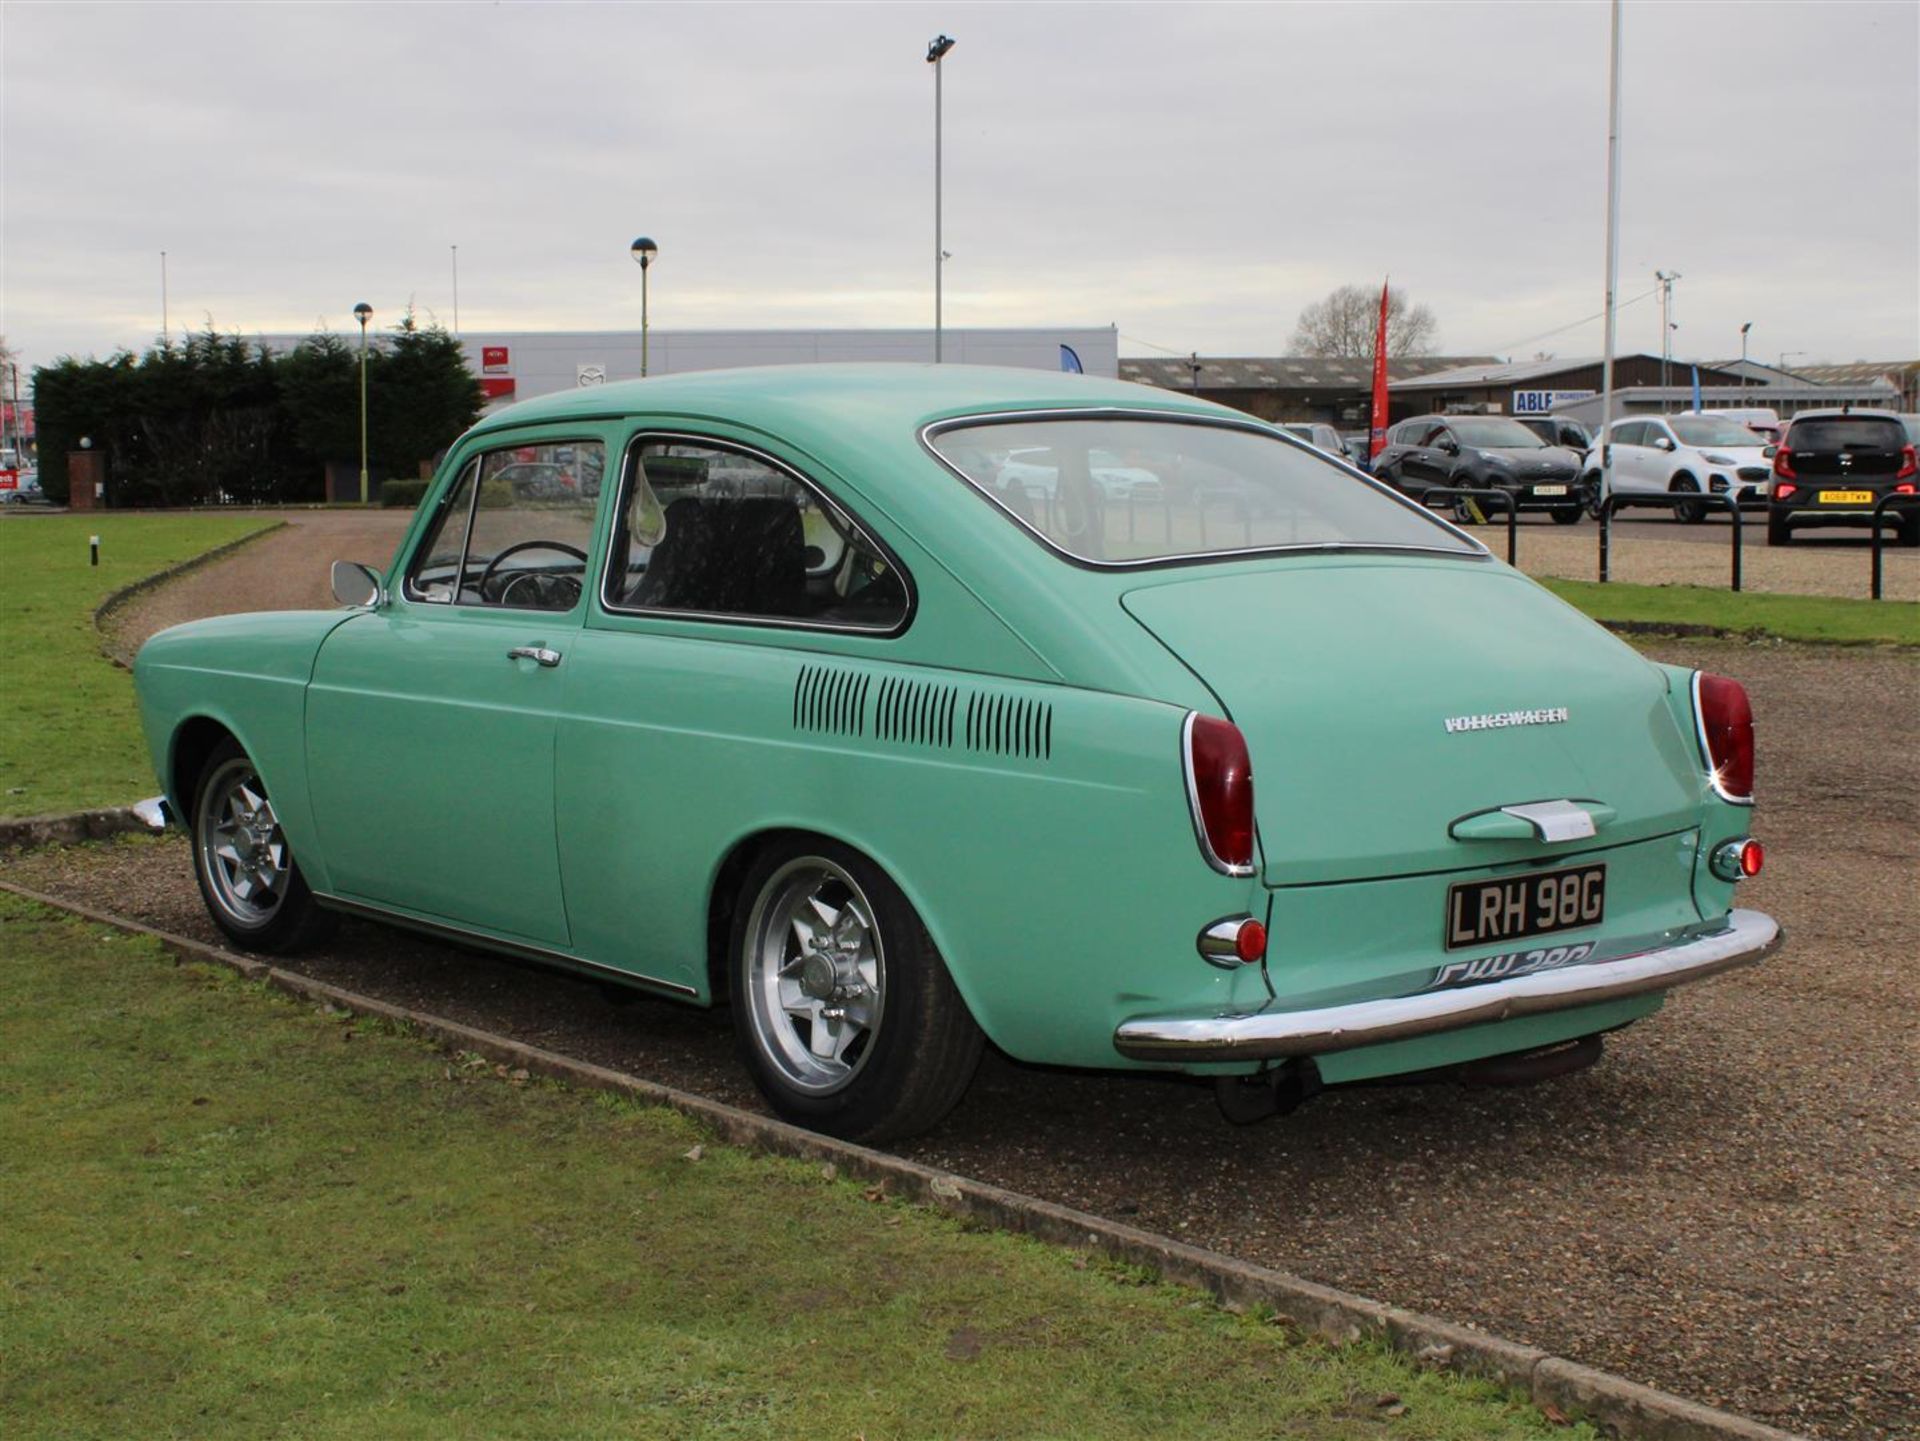 1969 VW Fastback 1600 Coupe LHD - Image 4 of 18